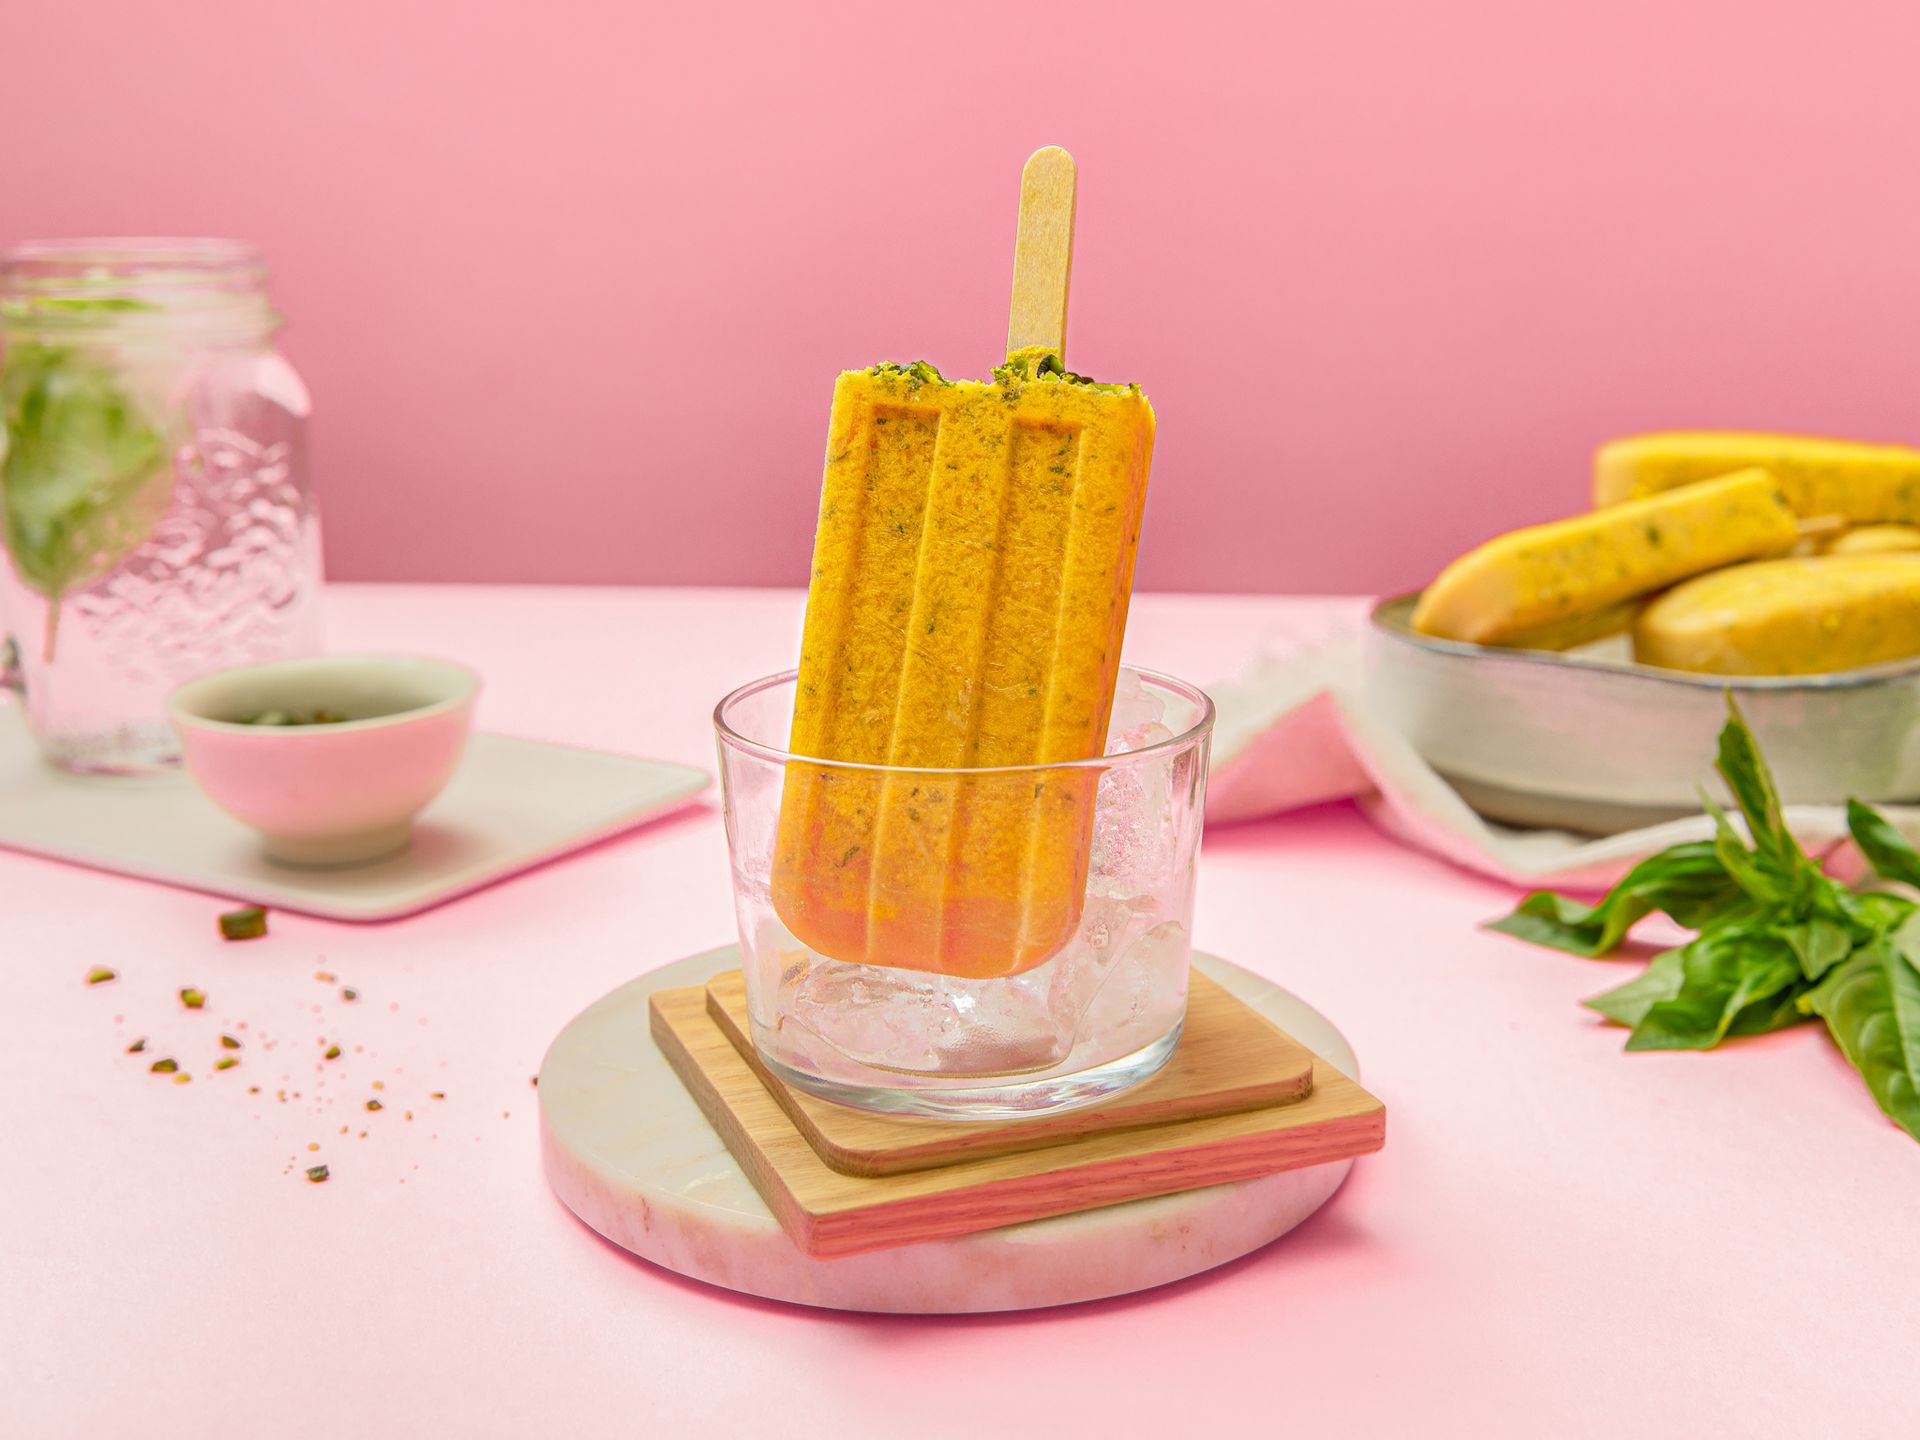 Cantaloupe-basil popsicles with pistachios